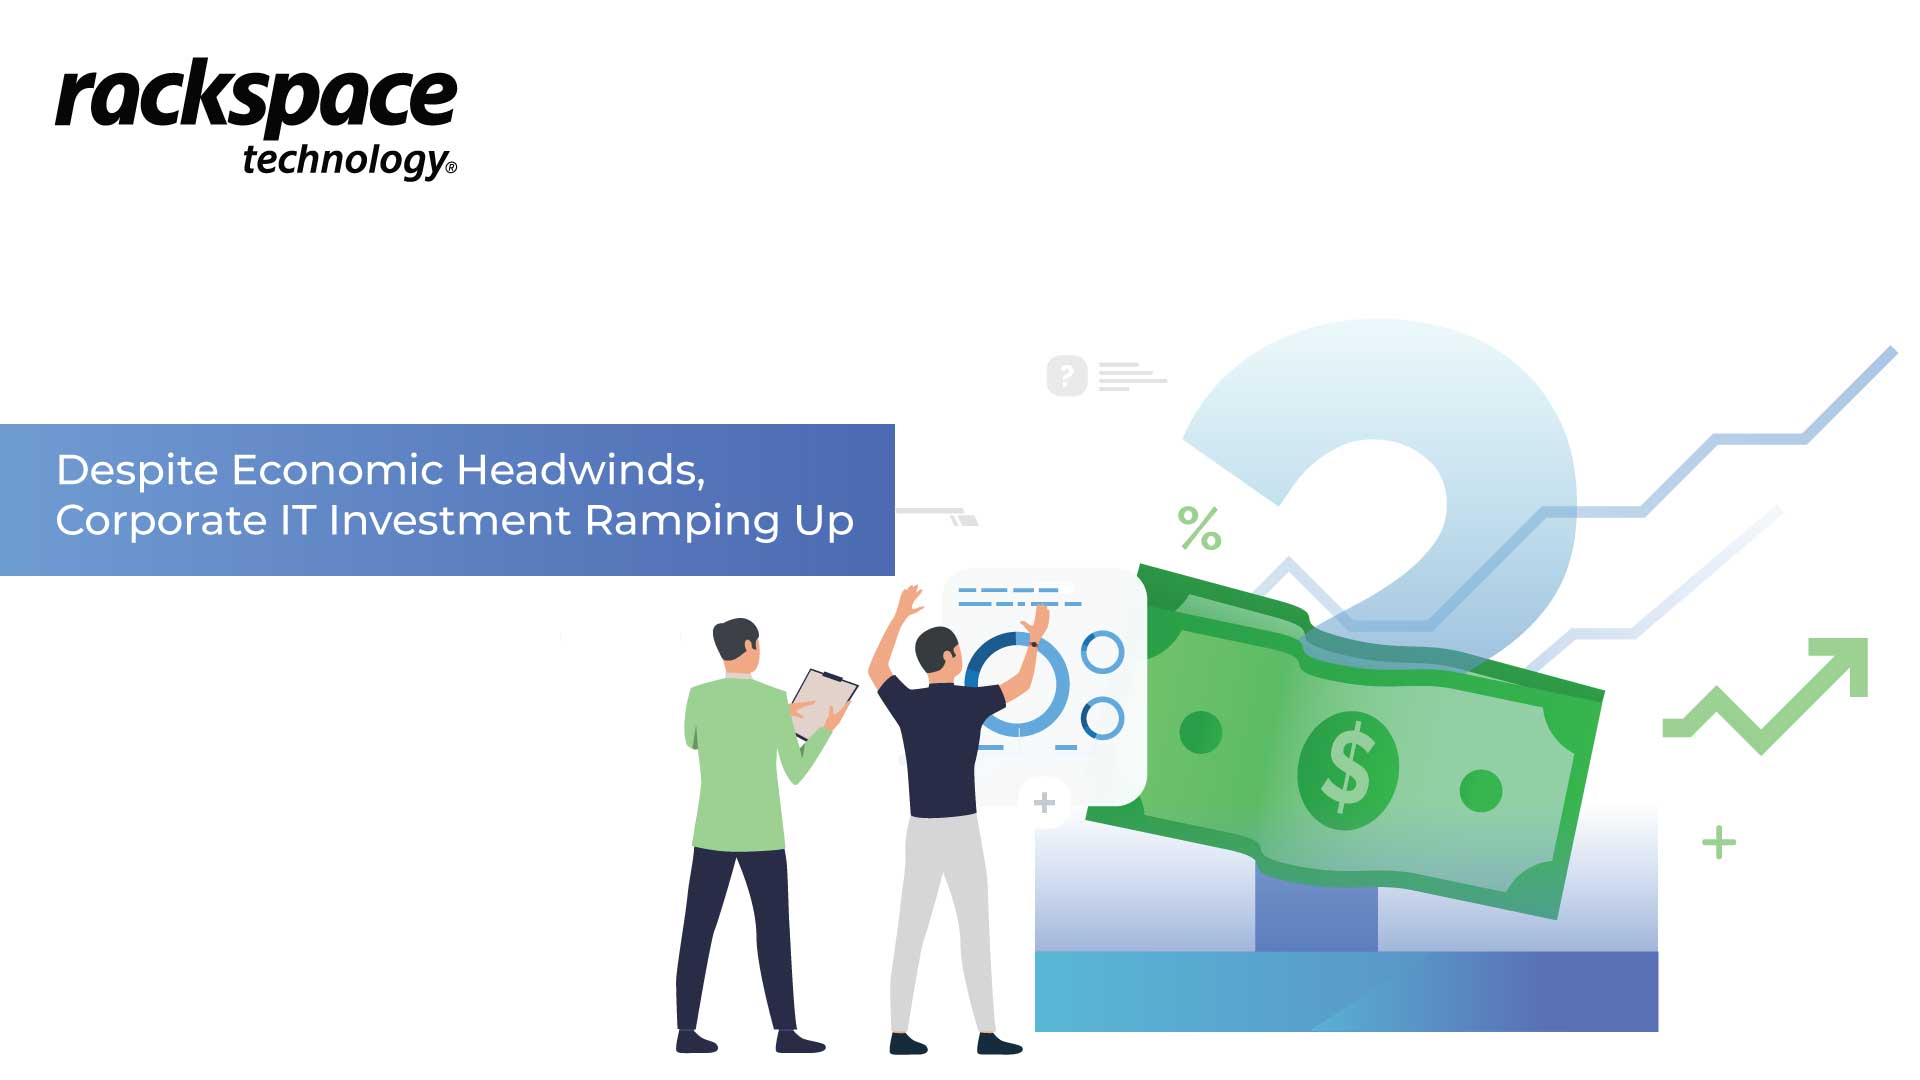 No Sign of Slowdown in Corporate IT Investment, Despite Economic Headwinds and Inflation, According to Rackspace Technology Survey: Managing IT in Challenging Economic Times